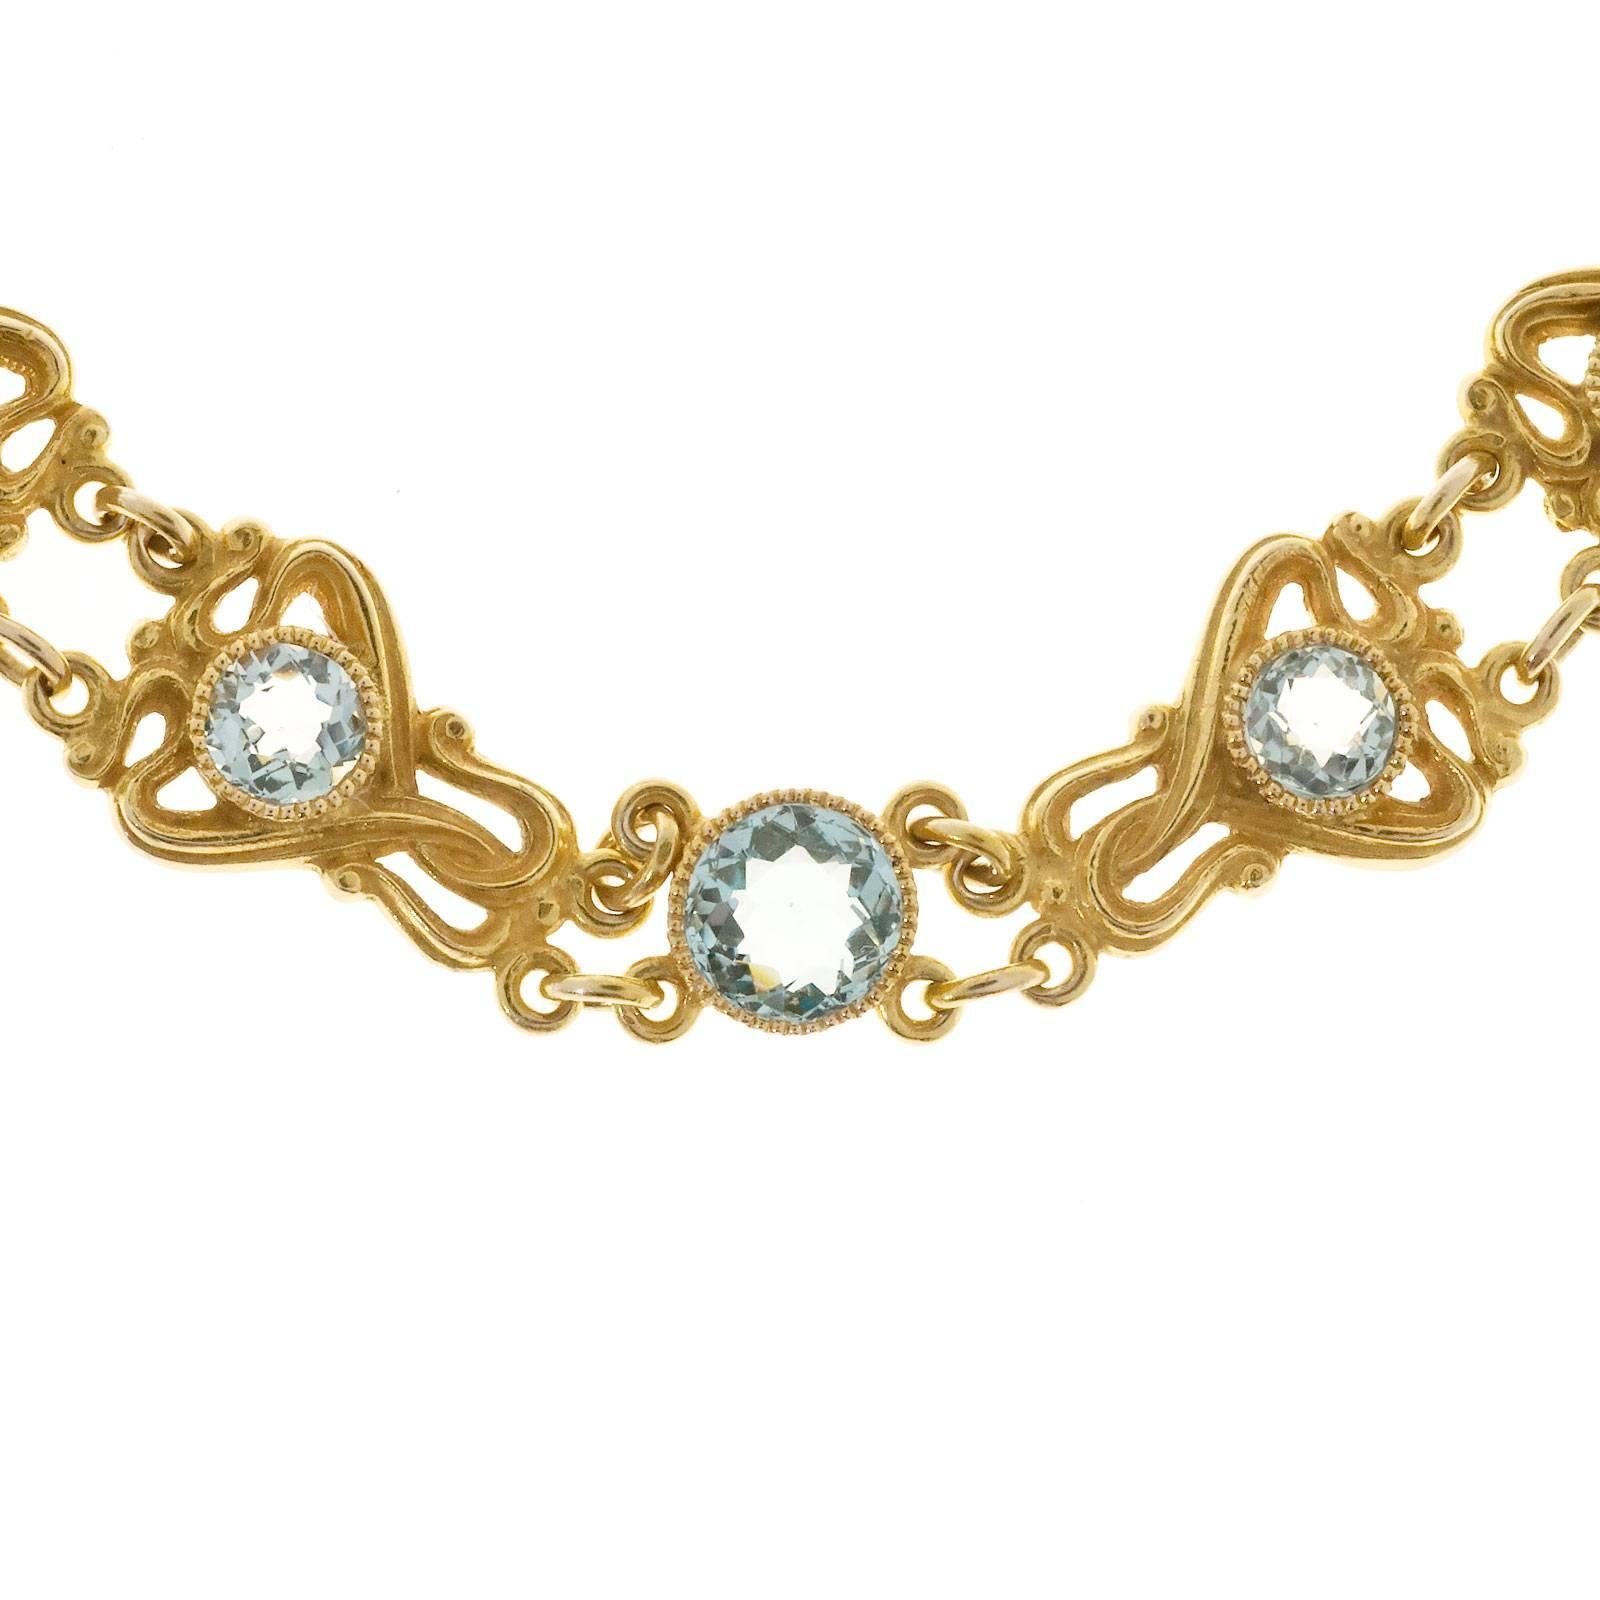 4.50 Carat Aquamarine Art Nouveau Open Work Gold Bracelet In Good Condition For Sale In Stamford, CT